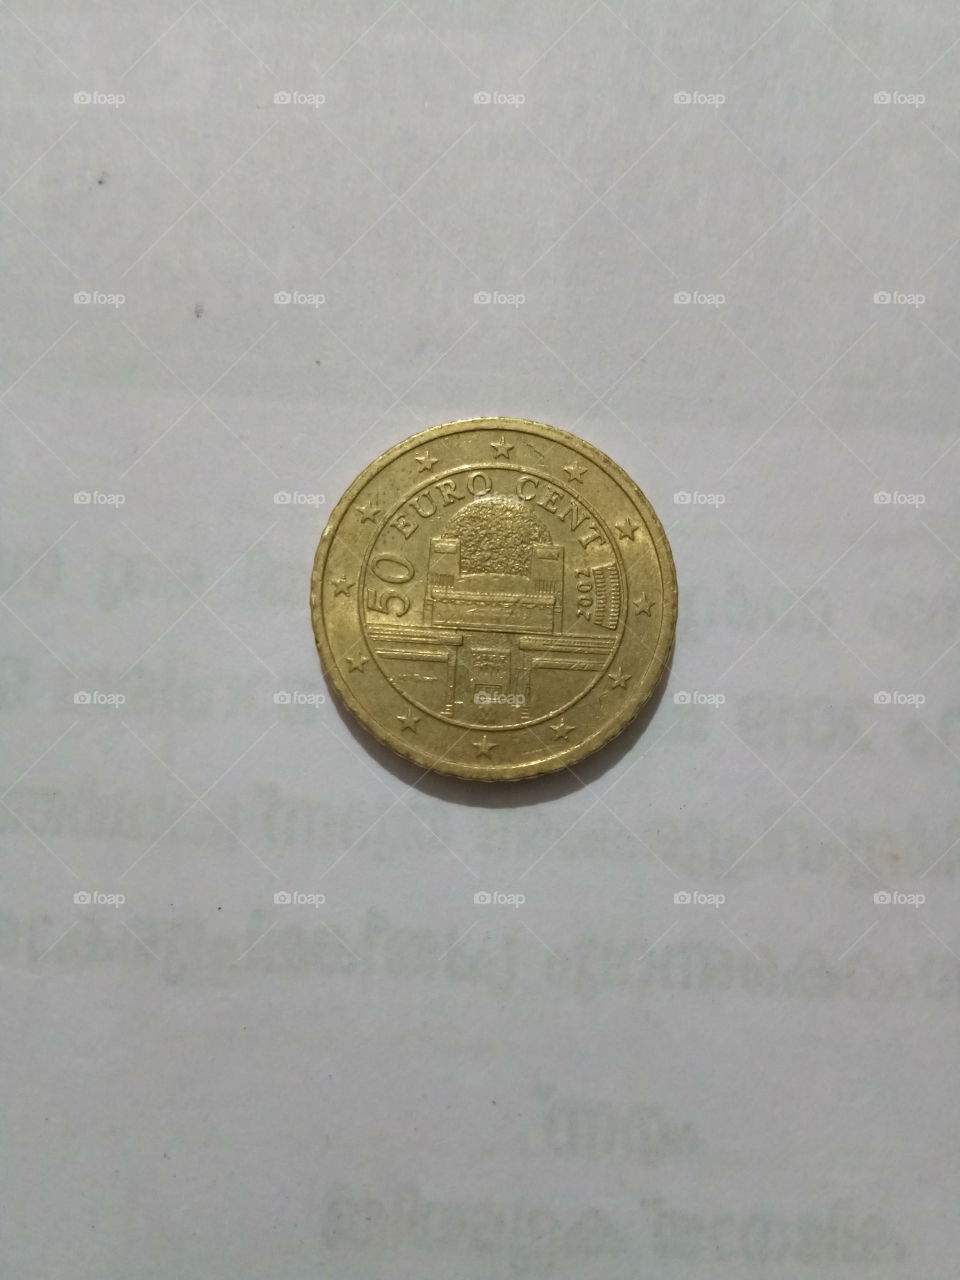 50 Euro Cent Coin Back Side